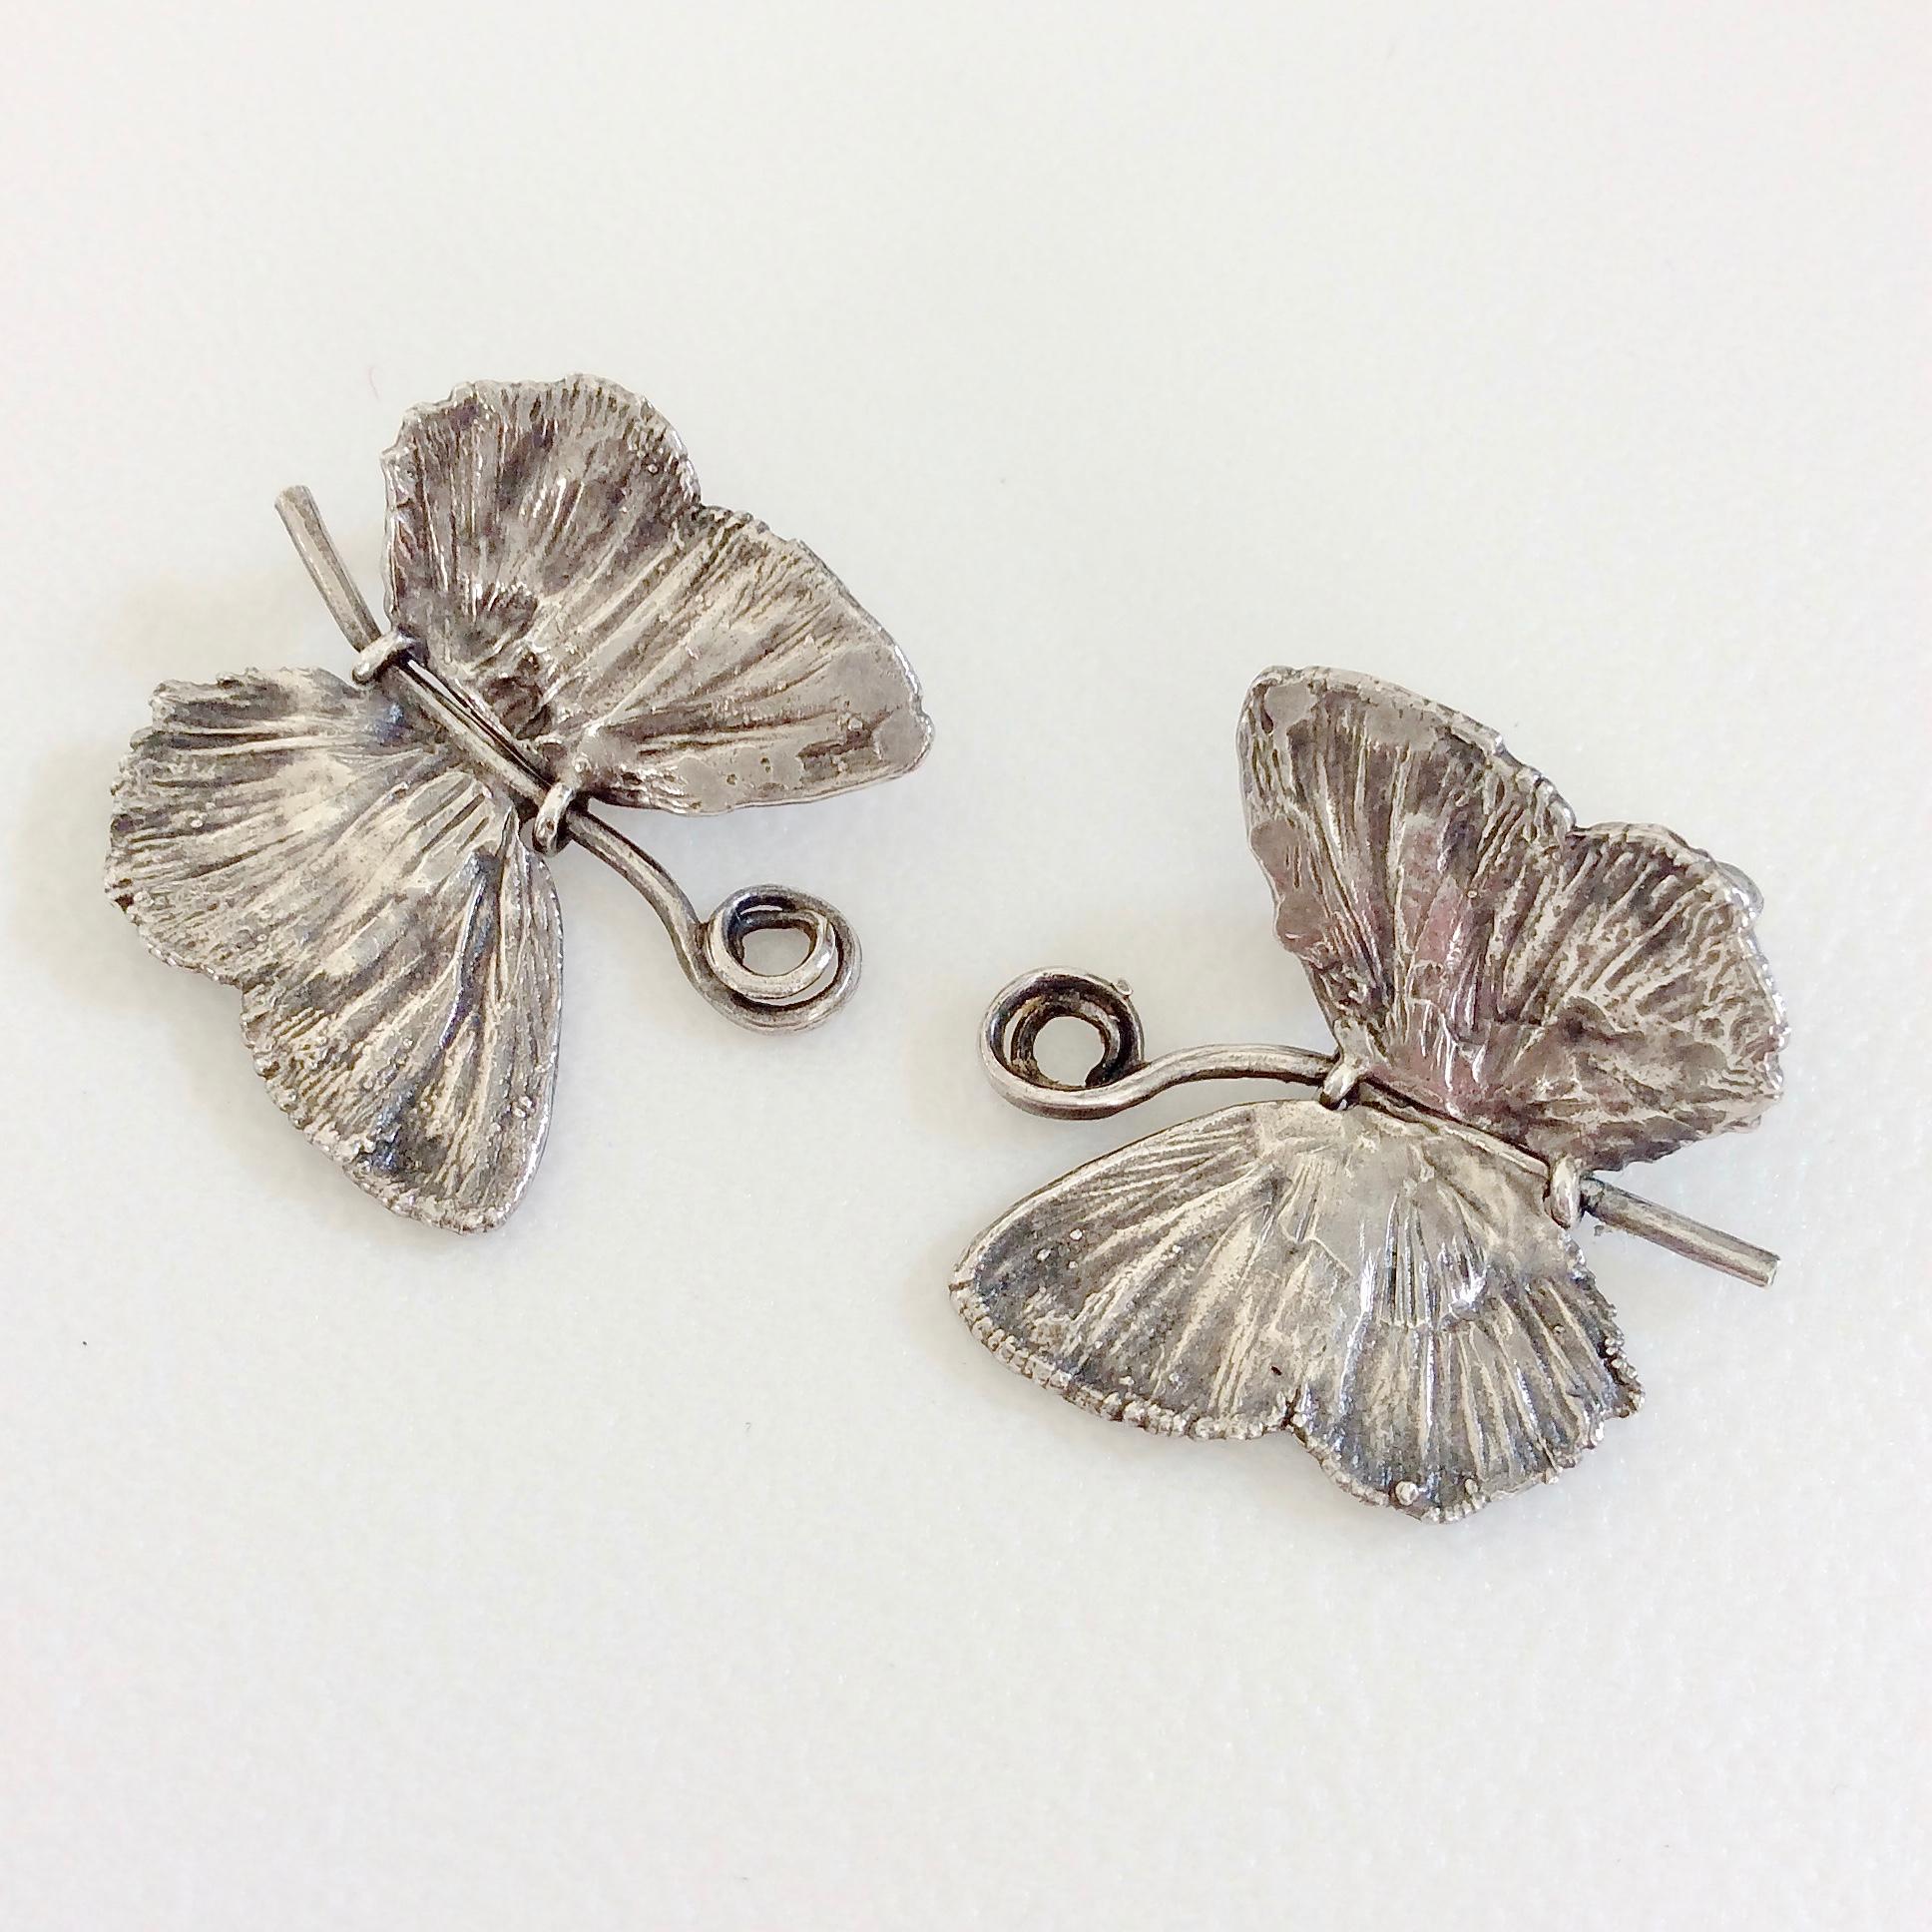 Claude Lalanne (1925-2019) butterfly earrings, edited by Artcurial c. 1988, Paris.
Sterling silver 925. Numbered 41/50.
In is original box with 